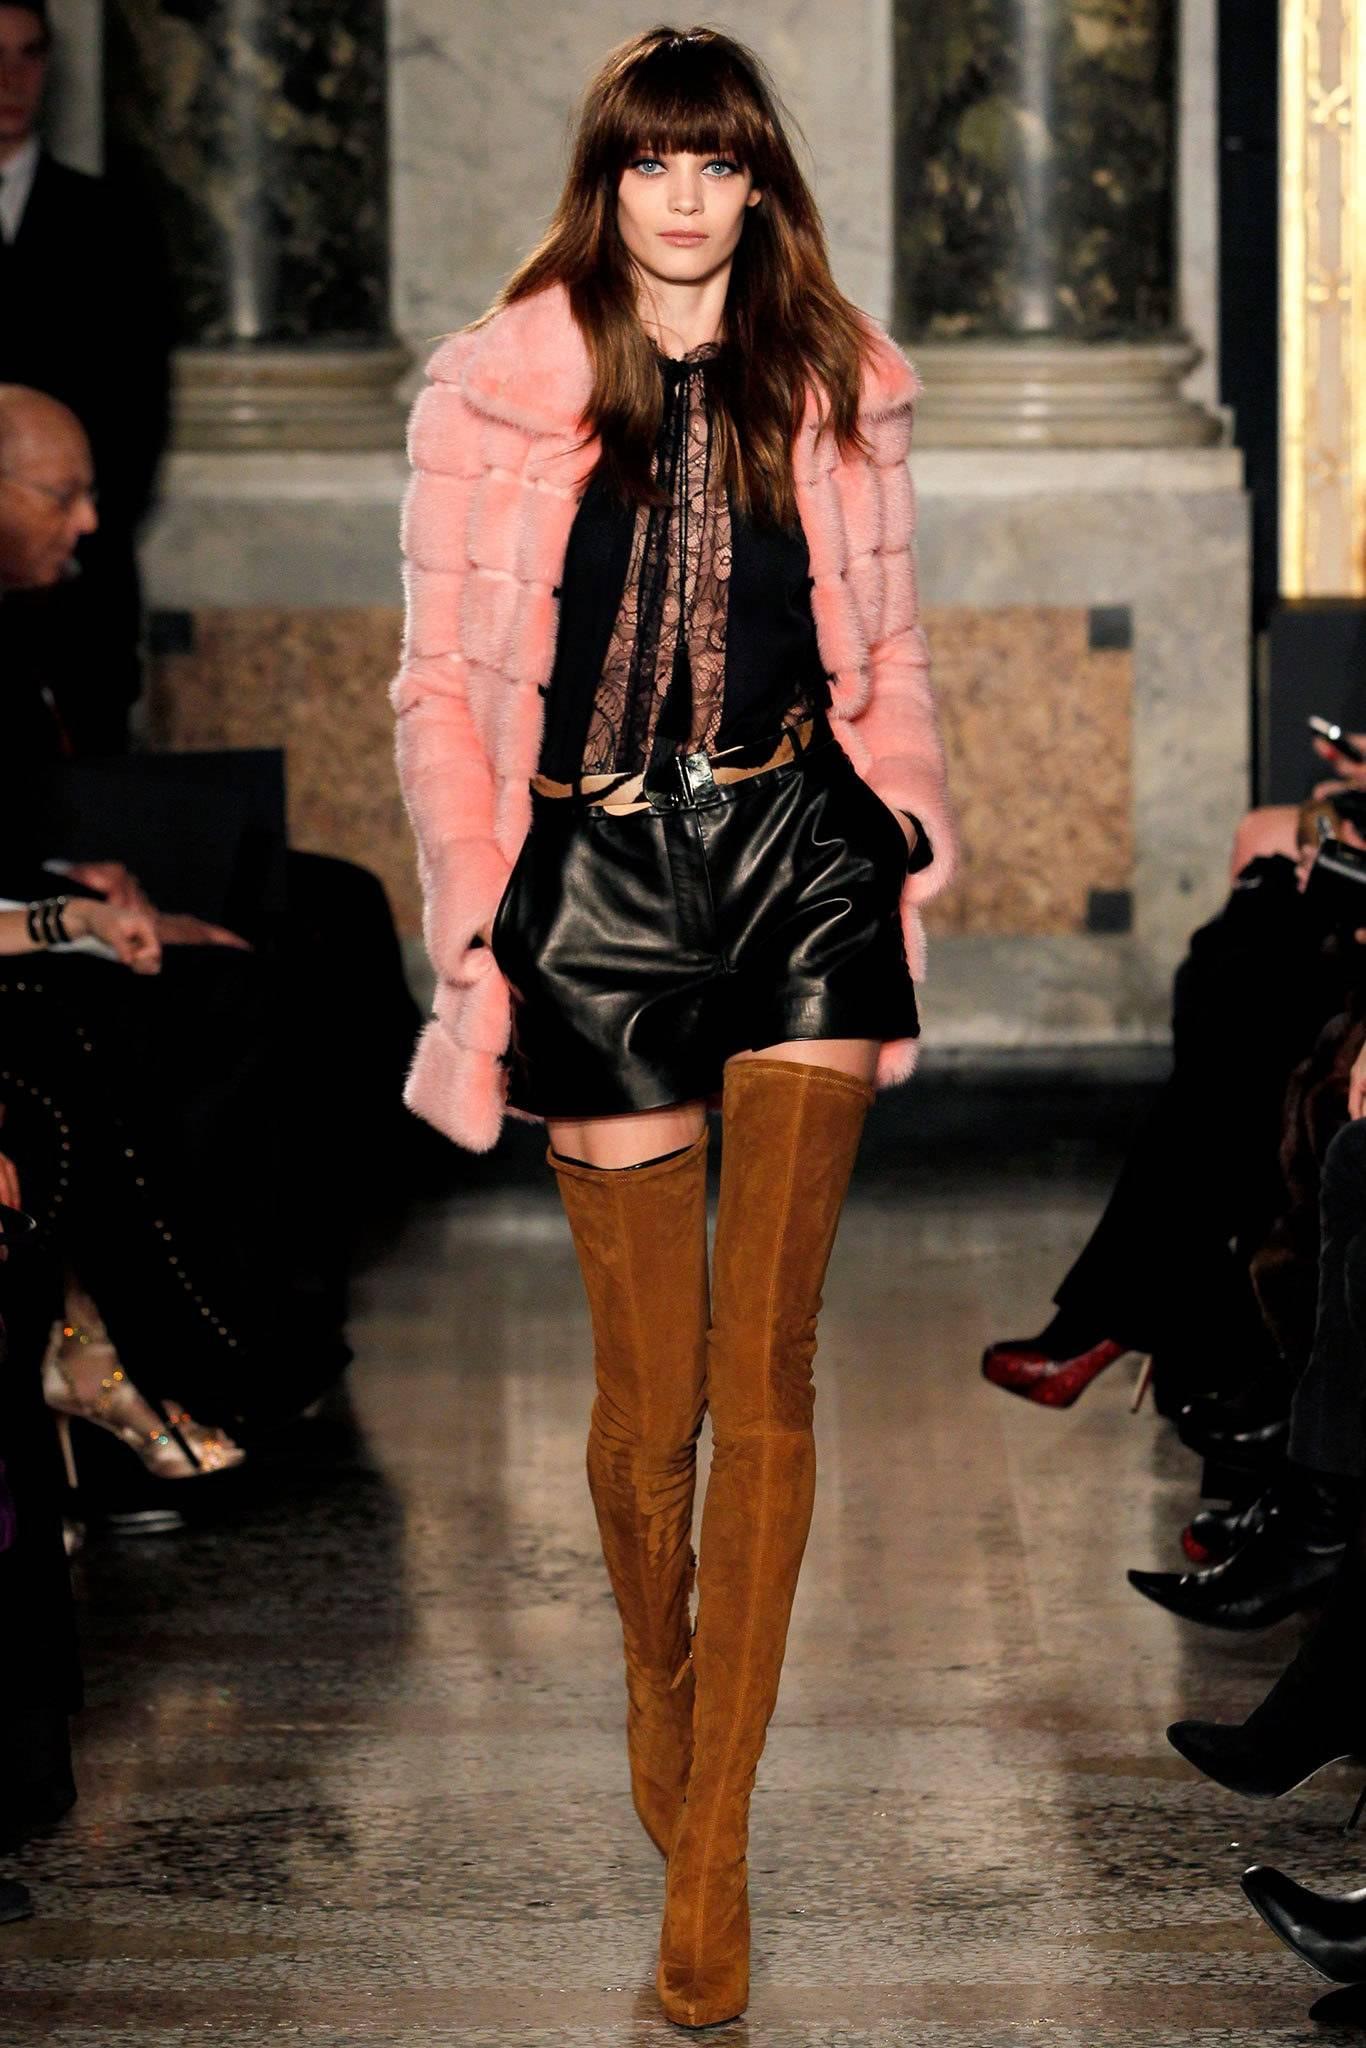 Emilio Pucci fall 2013 runway tan suede over the knee thigh high boots. Super high 5